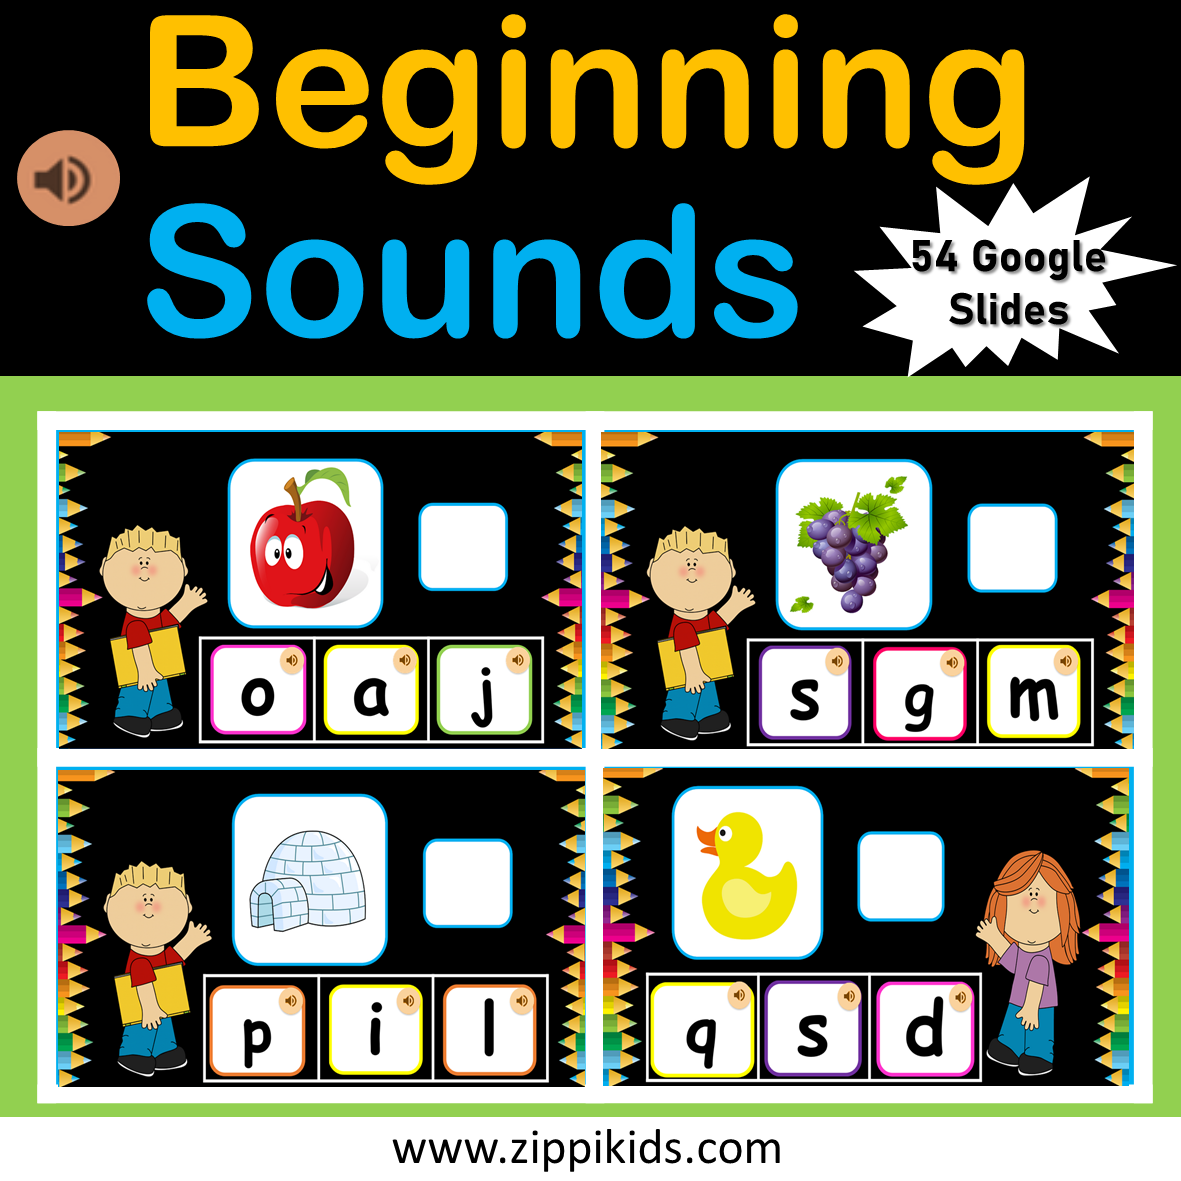 Beginning Sounds with Audio + Drag and Drop Letters - 52 Google Slides